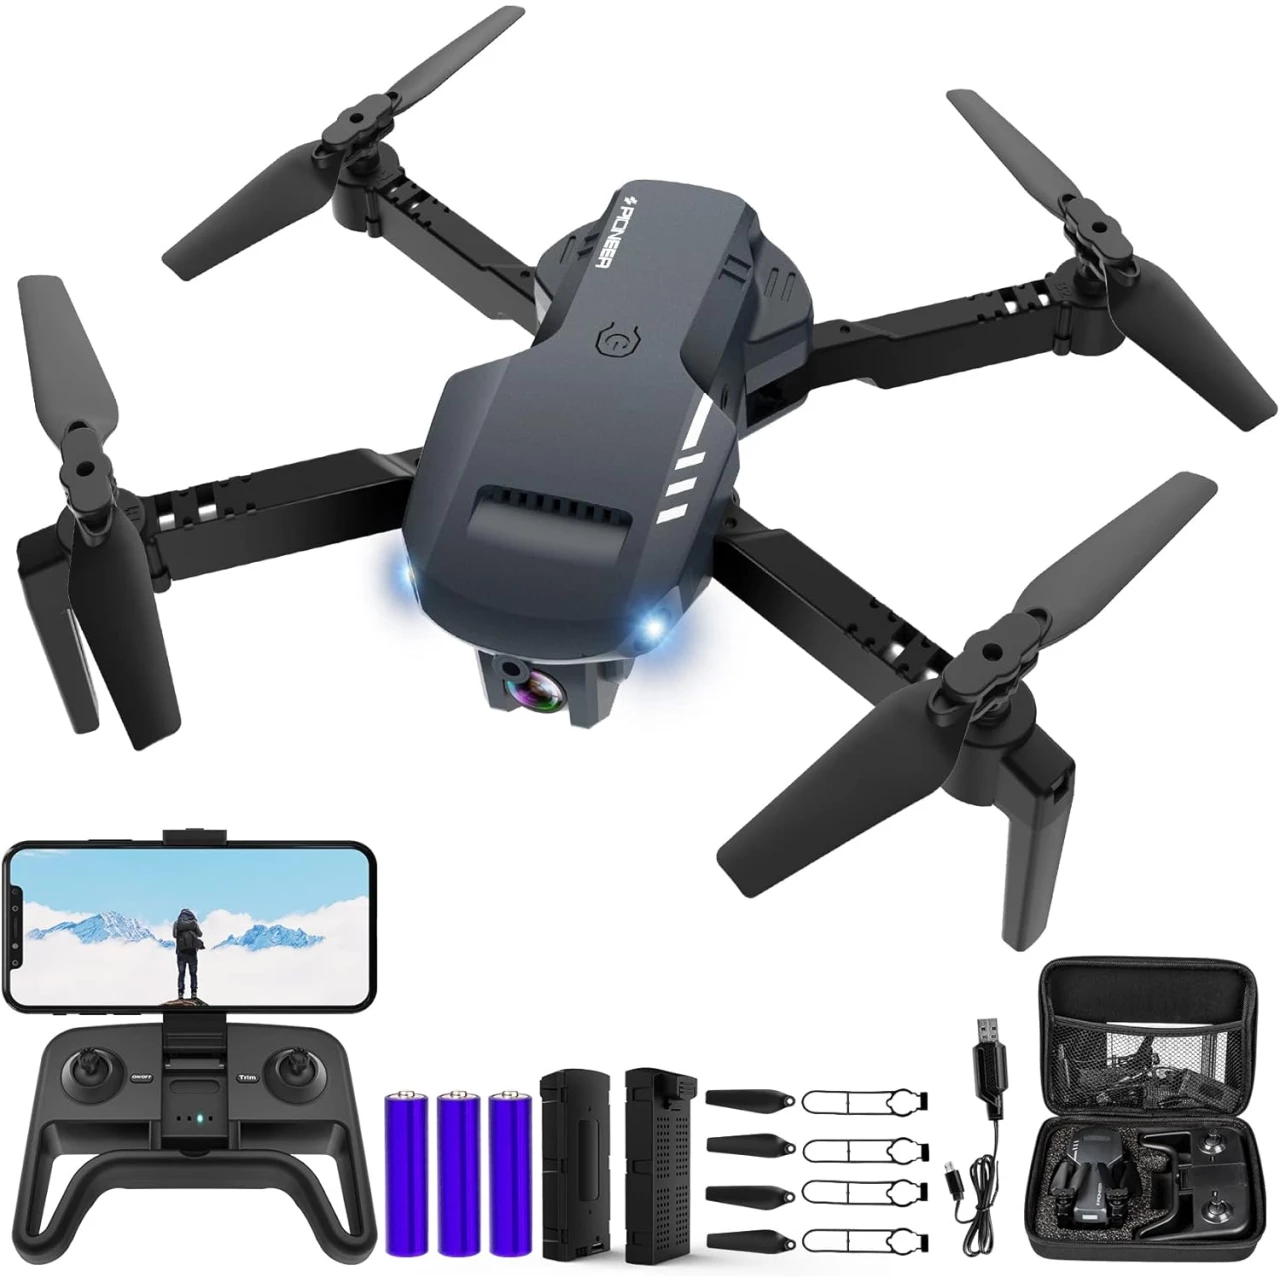 RADCLO Mini Drone with Camera - 1080P HD FPV Foldable Drone with Carrying Case, 2 Batteries, 90° Adjustable Lens, One Key Take Off/Land, Altitude Hold, 360° Flip, Toys Gifts for Kids, Adults, beginners, Remote Controlled, Black